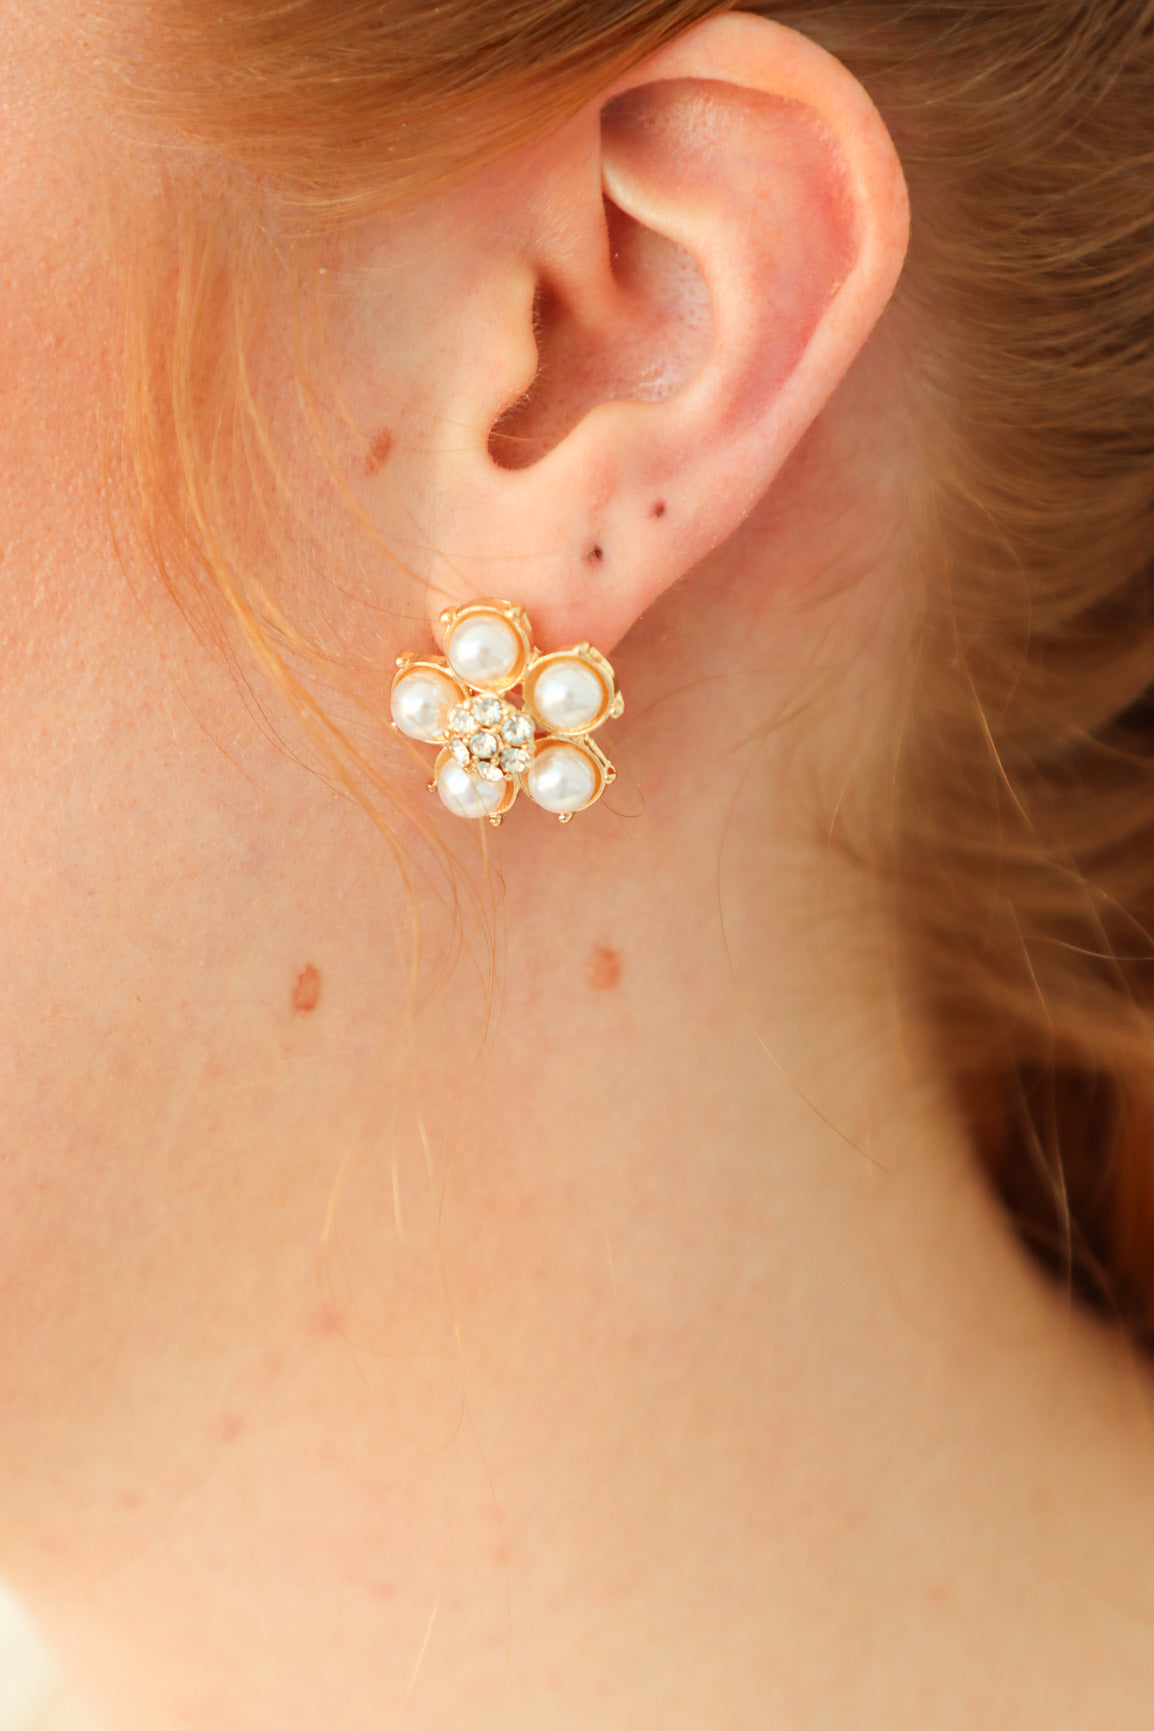 girl wearing gold daisy shaped earrings with pearl and rhinestone detailing